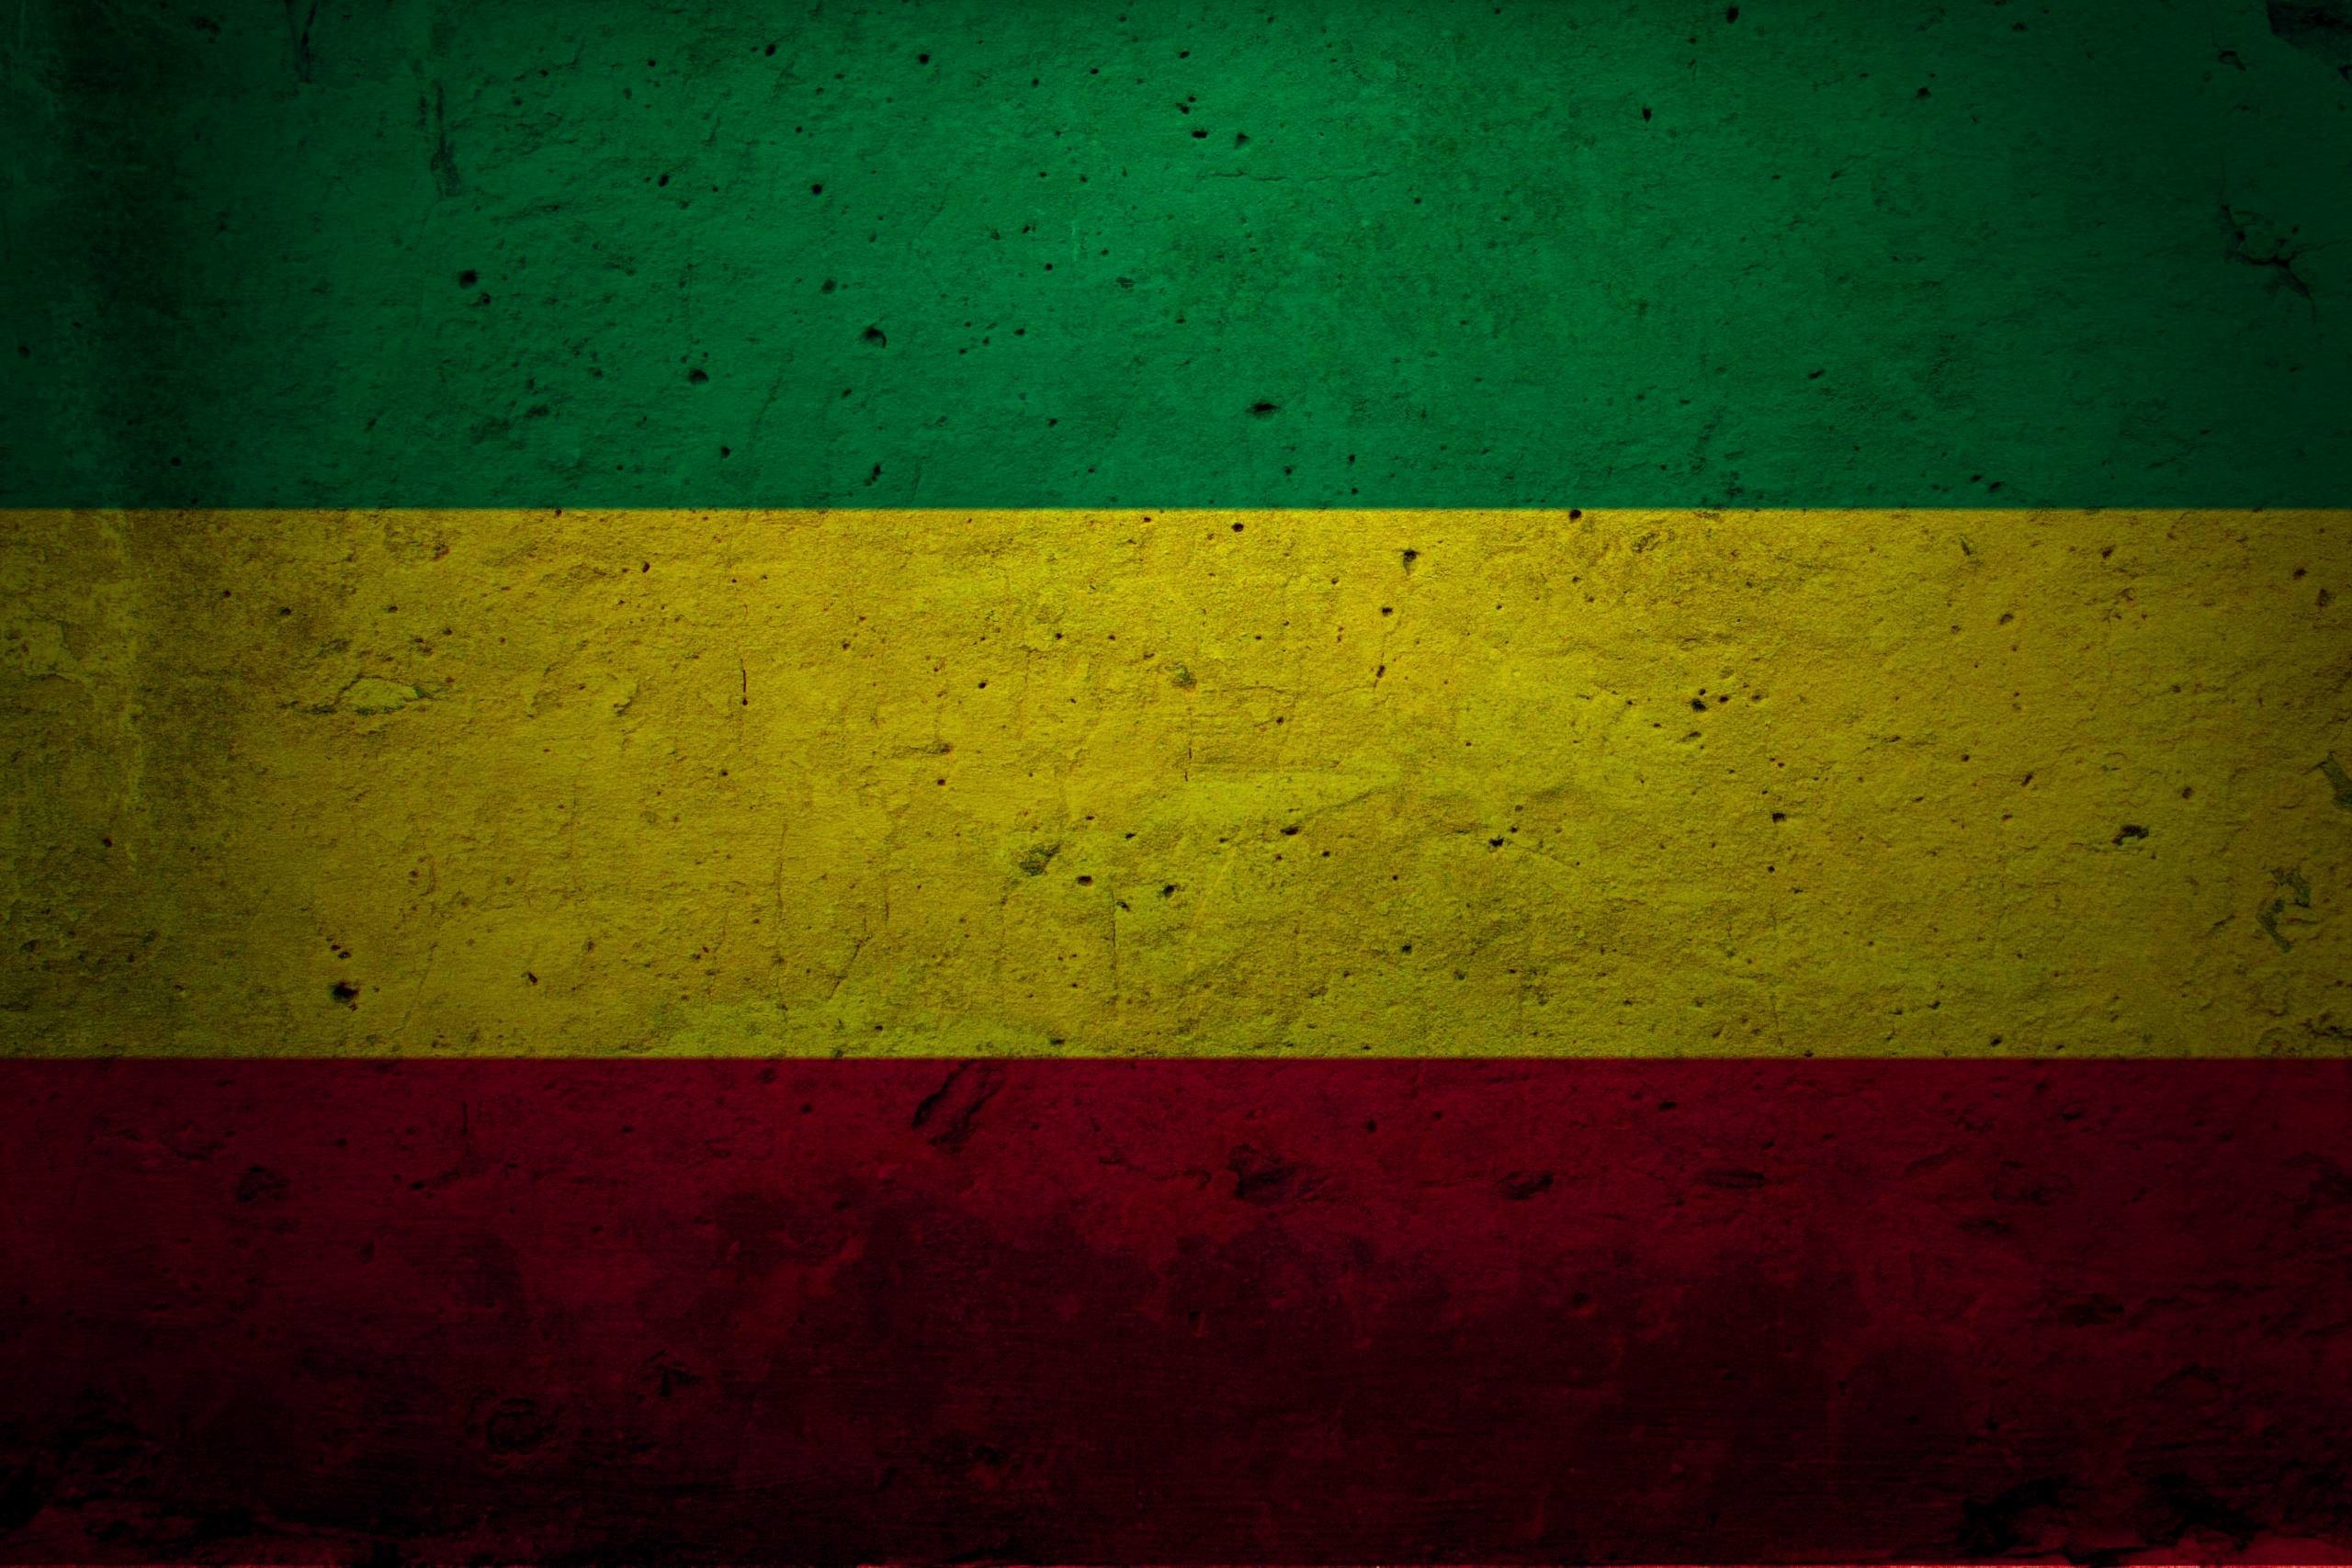 2560x1707 Hd Rasta Wallpapers 2018 42 Pictures